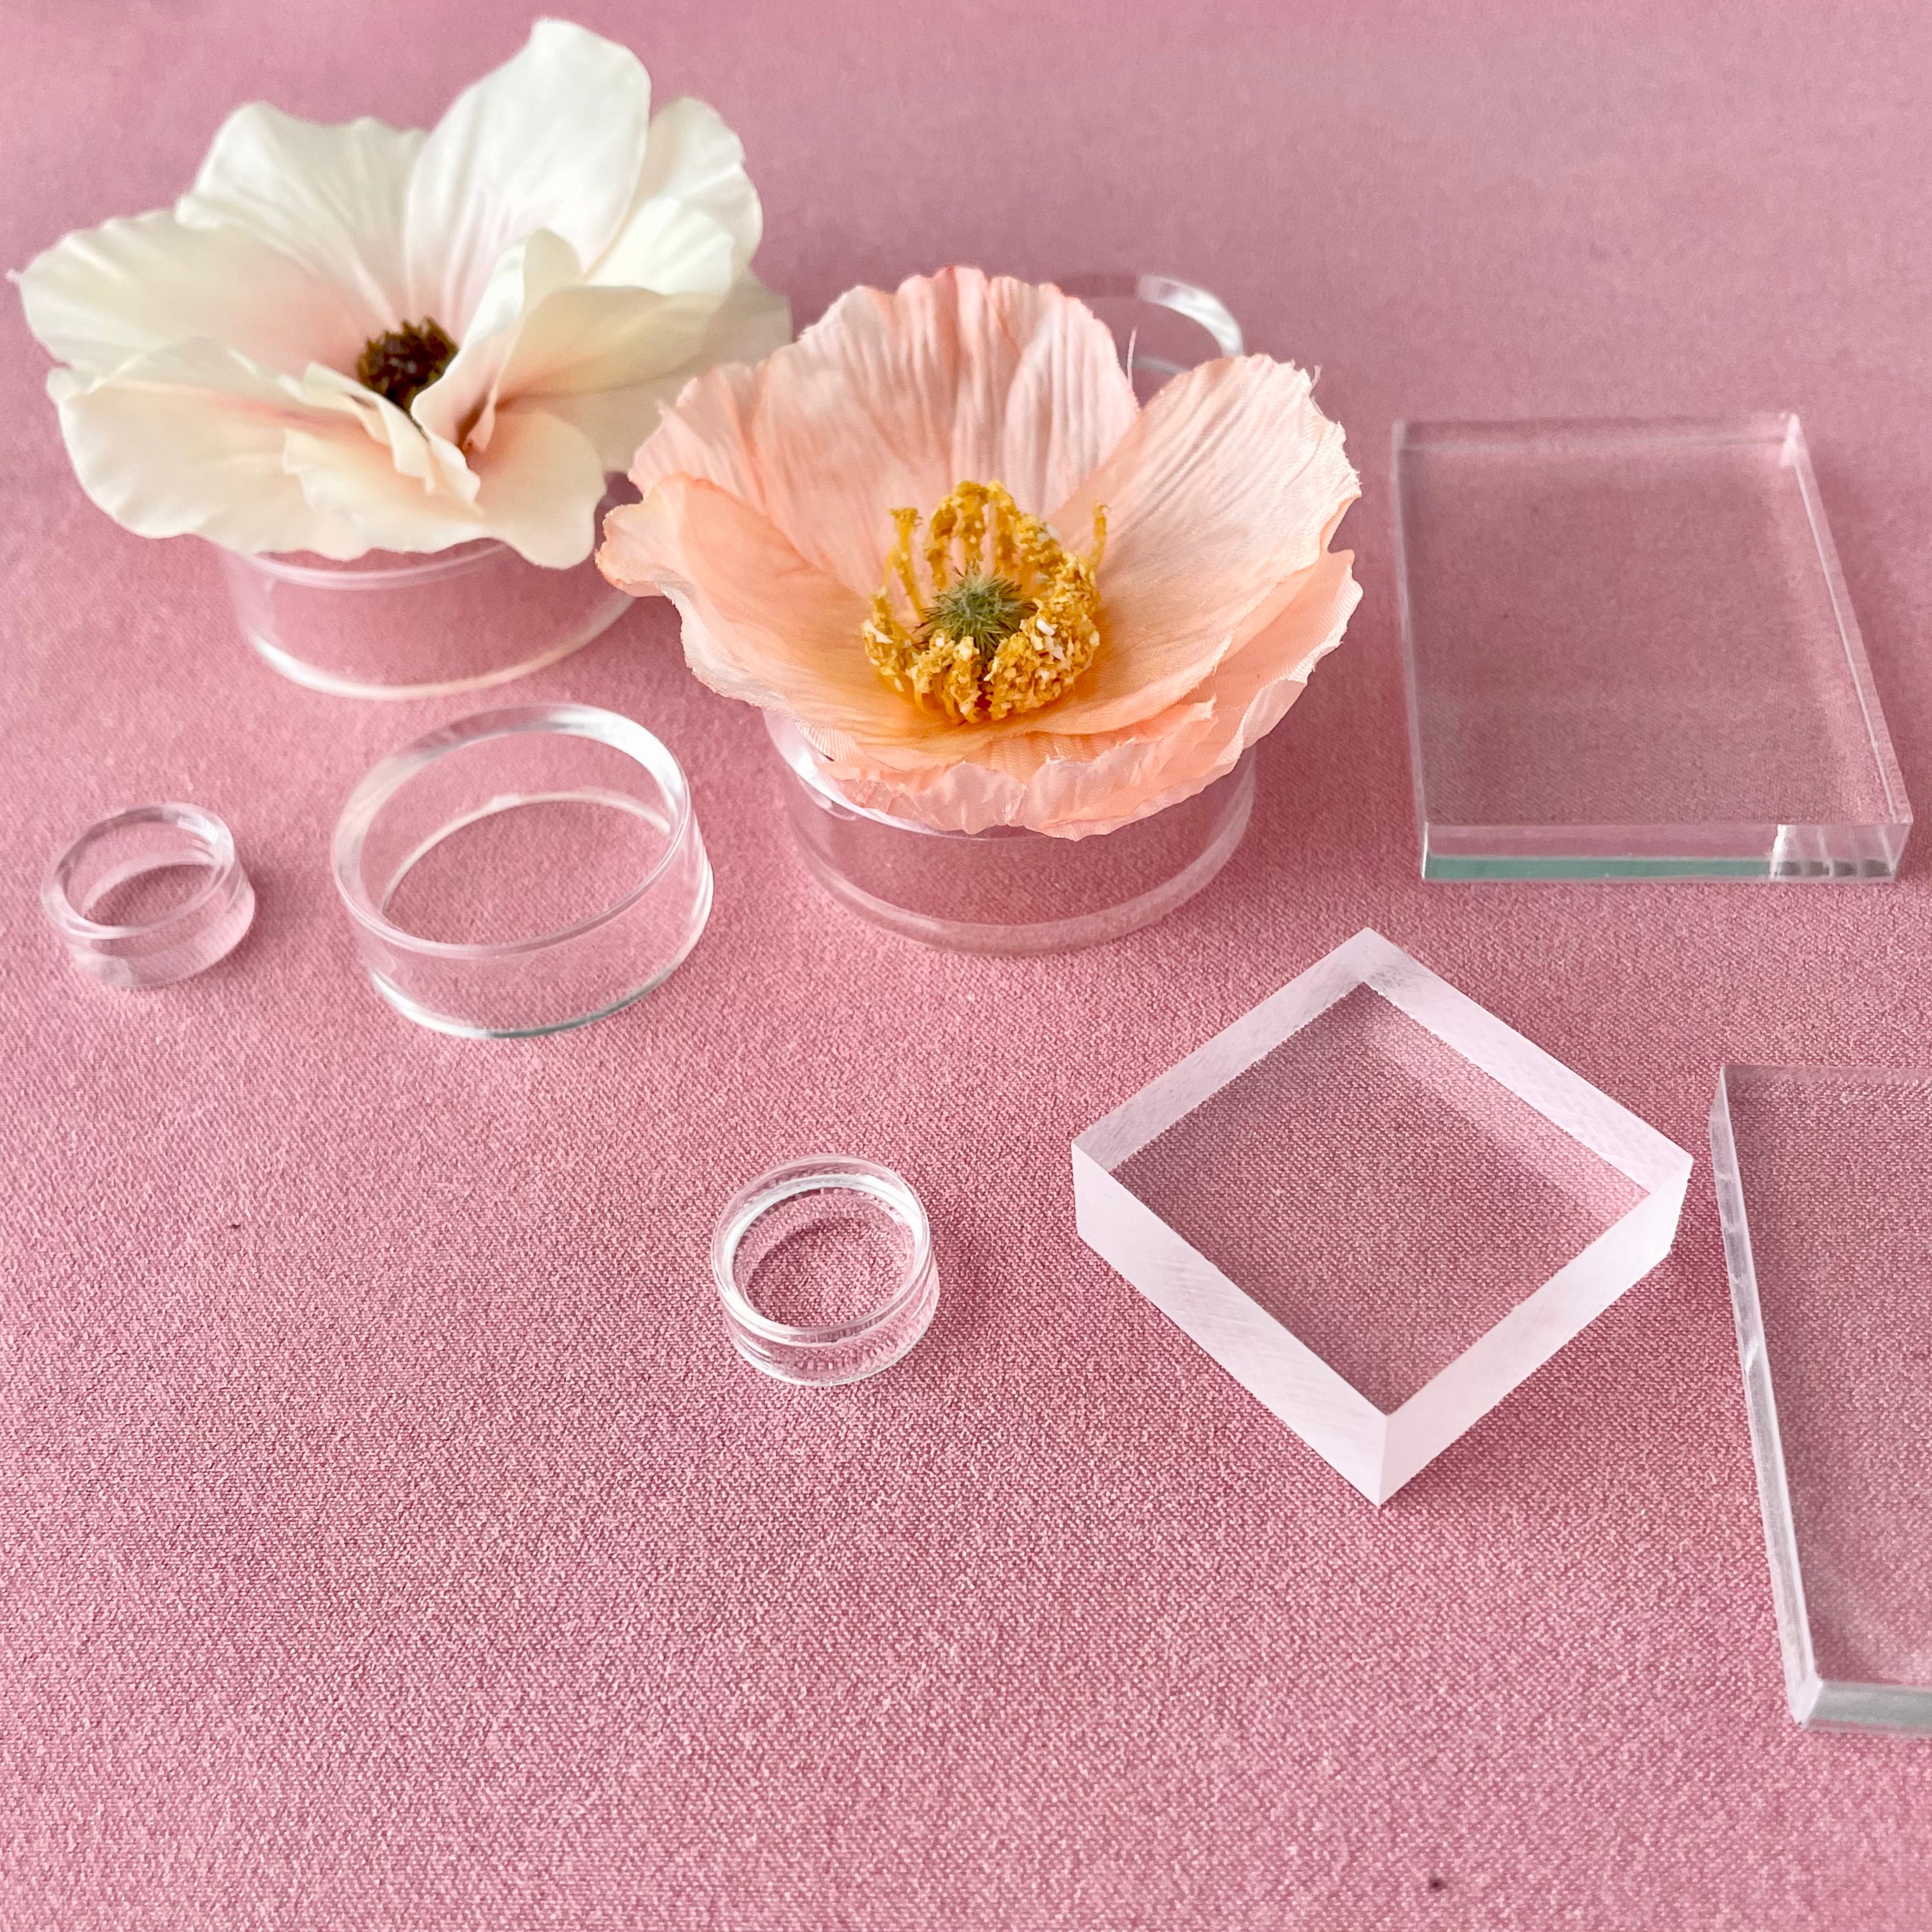 Close up side angle image of Clear Acrylic Styling Block Set & Floral Risers for Flat Lays on a Dusty Pink Styling Mat from Champagne & GRIT